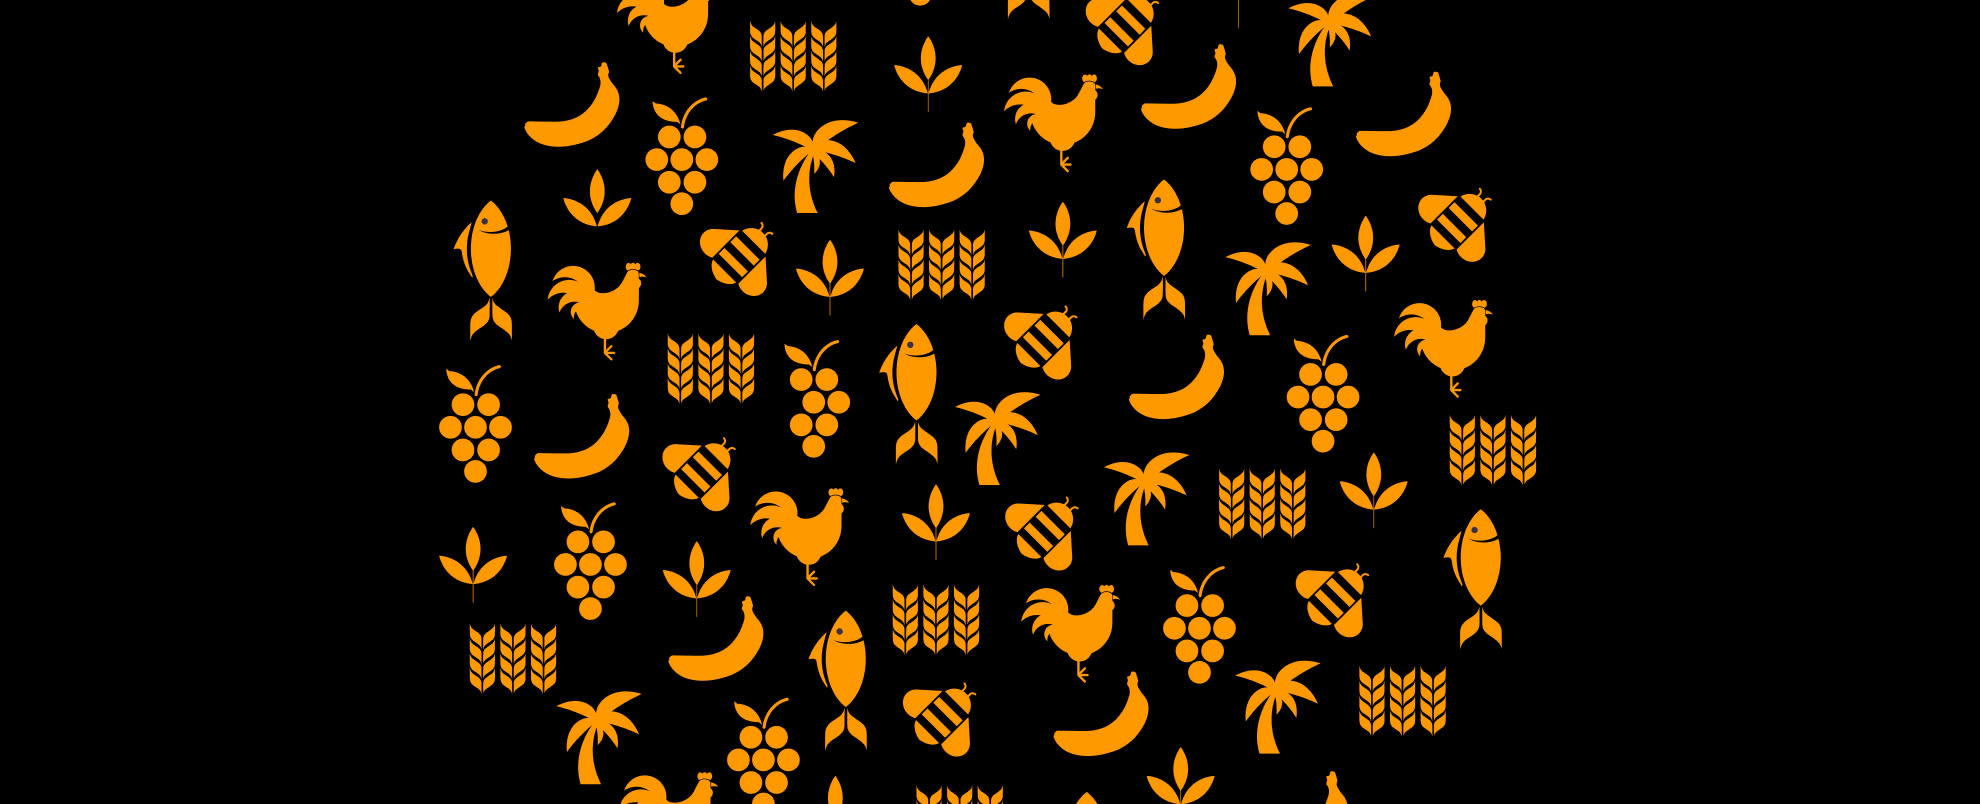 A collection of food icons in orange such as plants, grapes, bananas, chicken, and corn